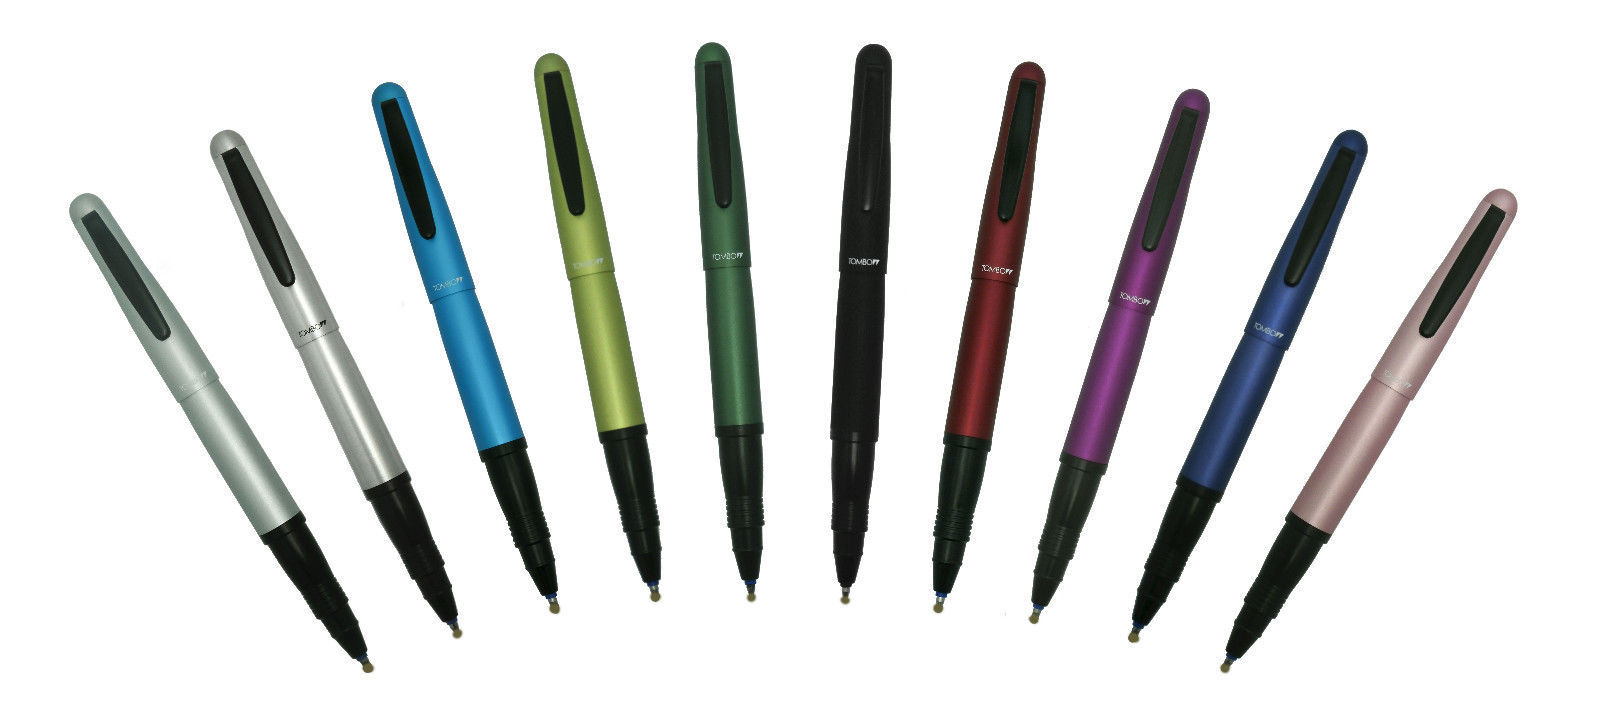 Tombow Object Rollerball pen Different designs, Free Shipping! - $43.54 - $46.44